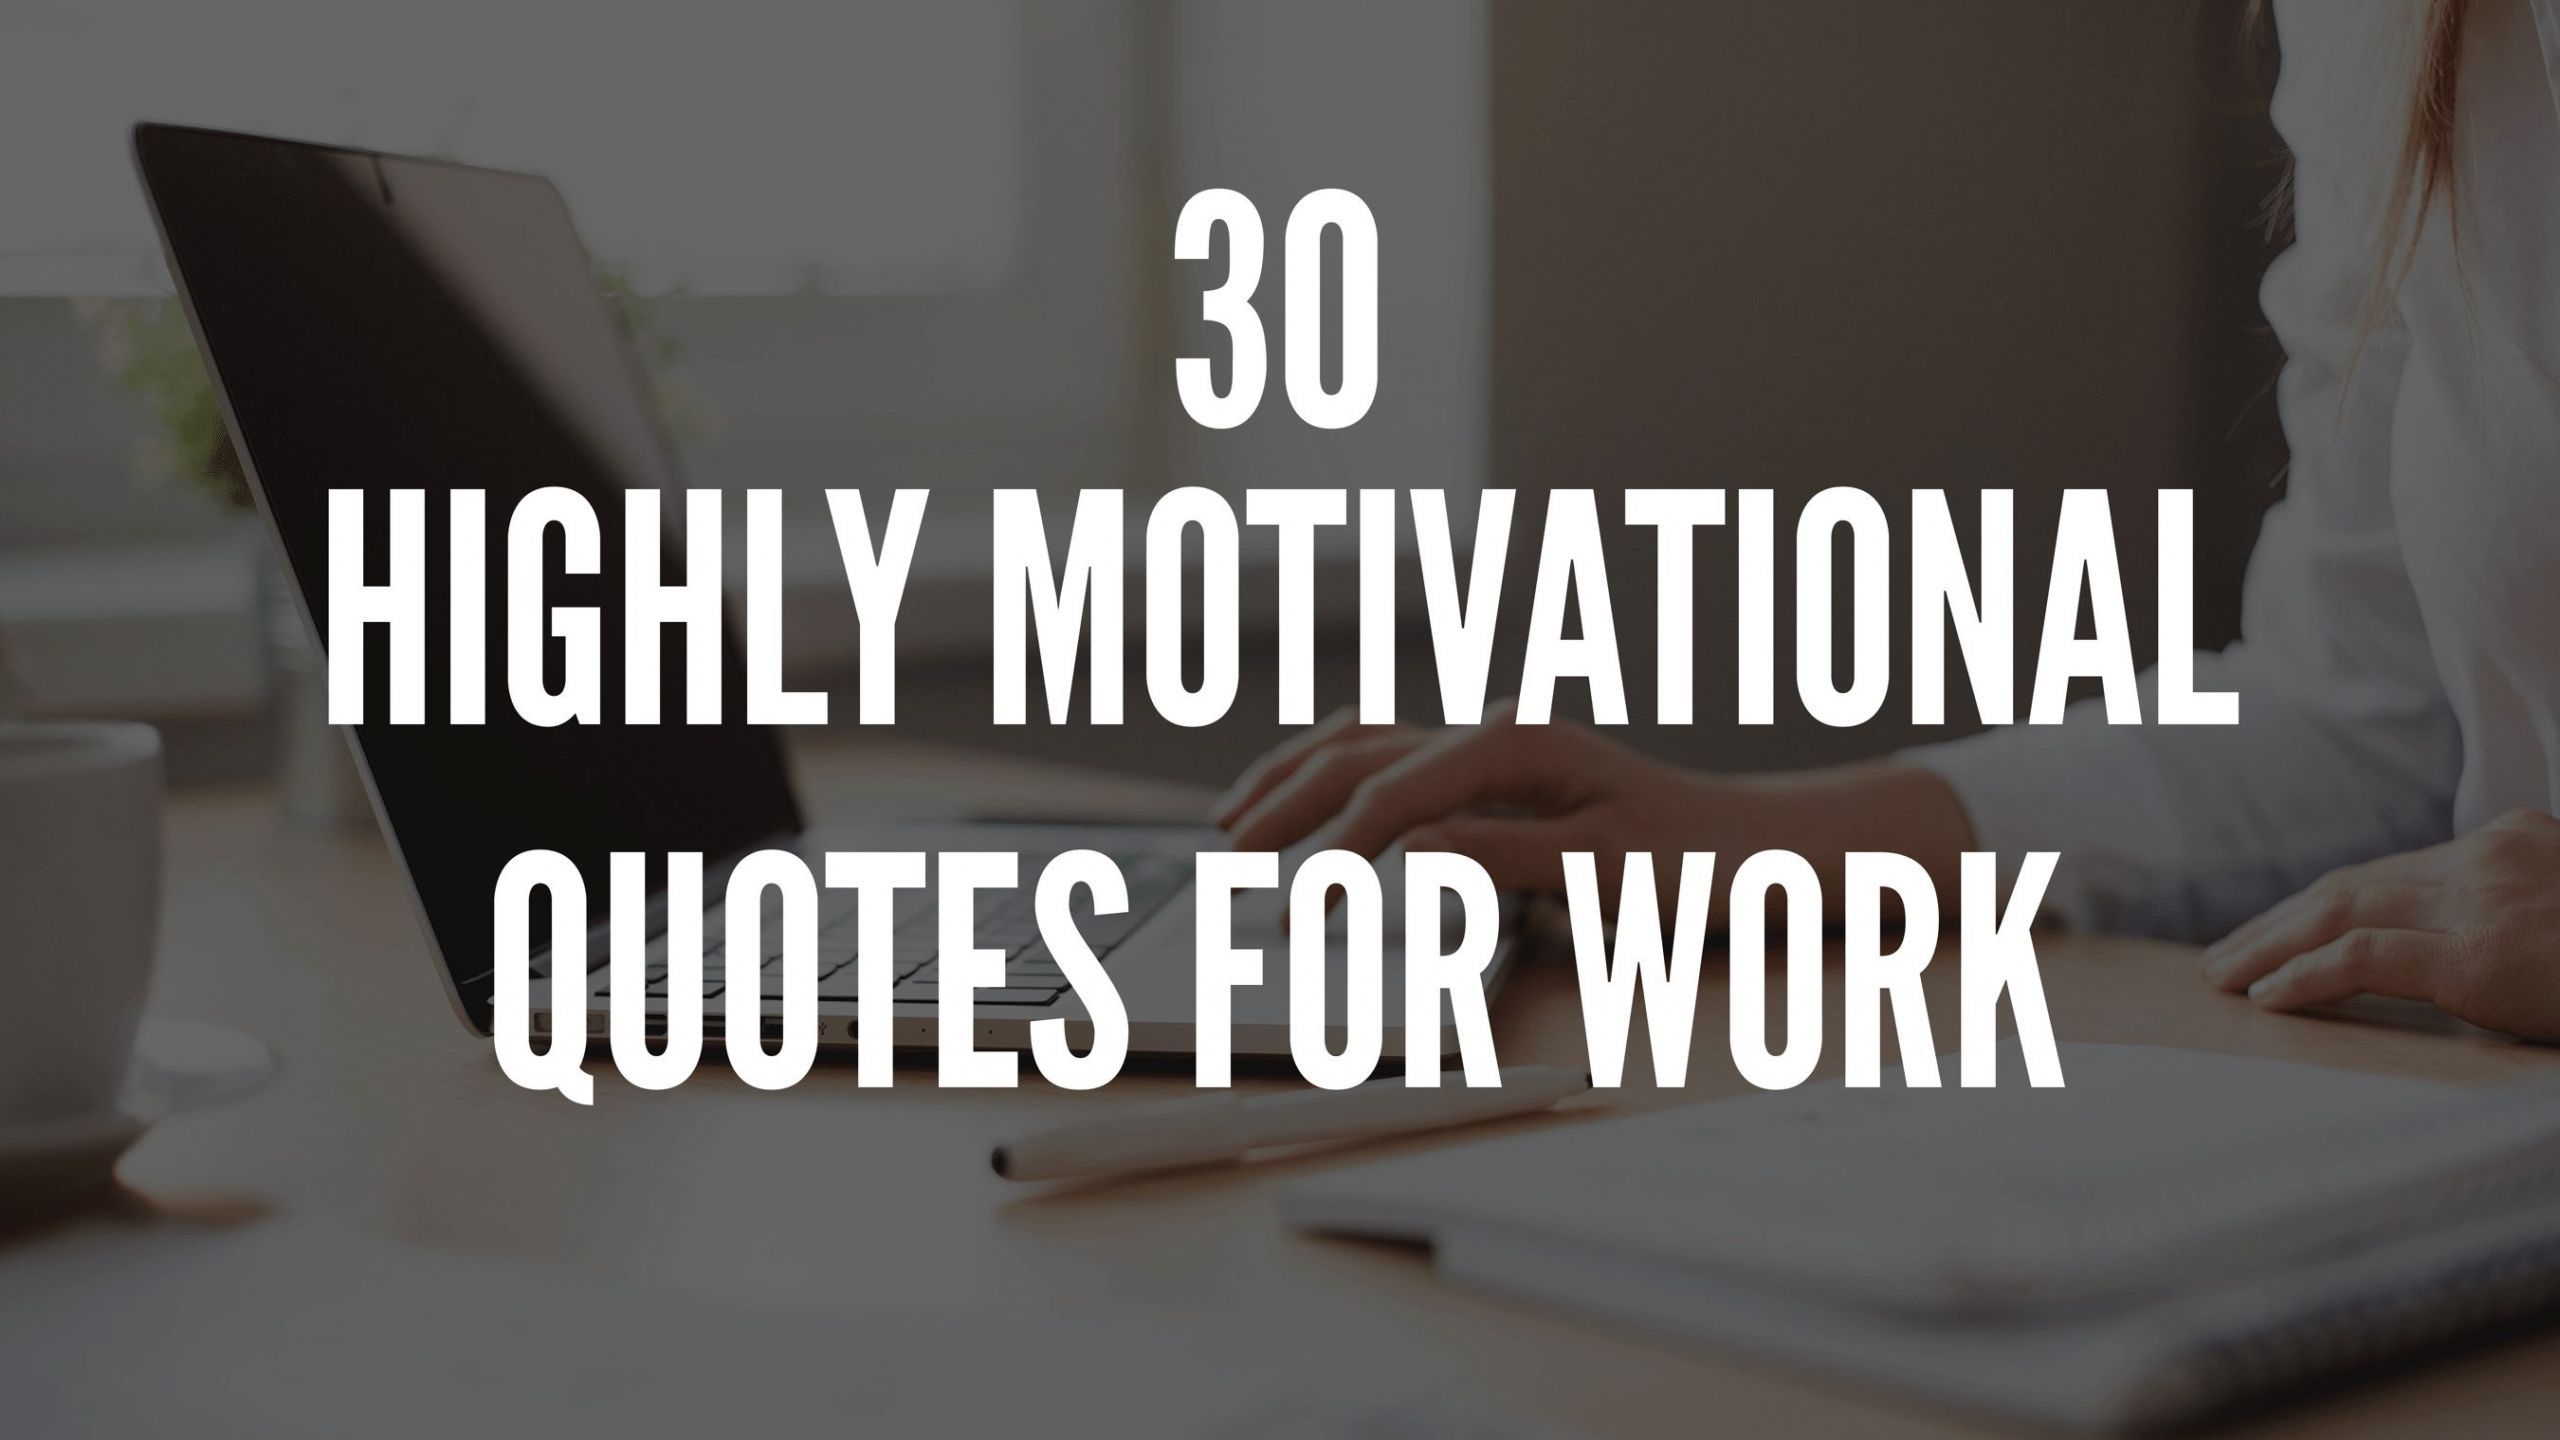 Motivational Quotes About Work
 Amazing Quotes on Flipboard by Damien Thomas